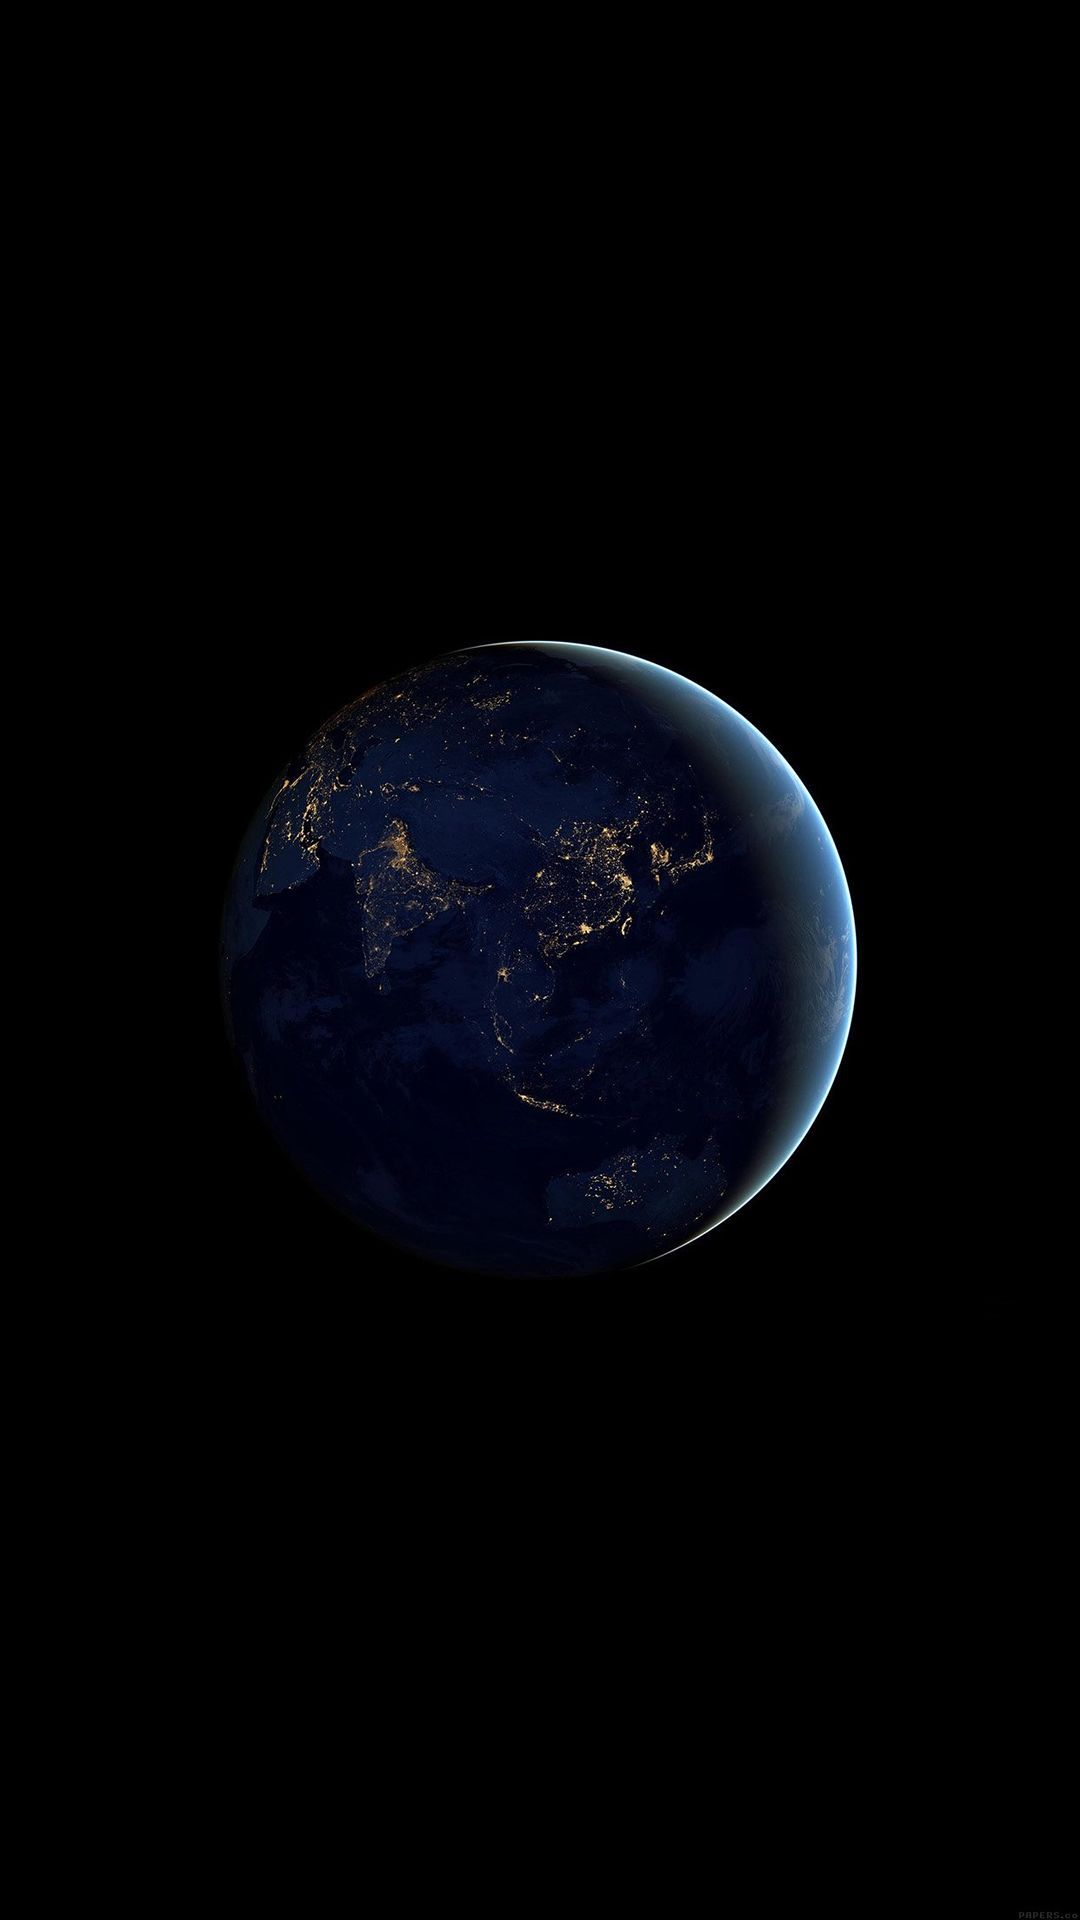 Asia At Night Earth Space Dark IPhone 6 Wallpaper Download. IPhone Wallpaper, IPad Wallpaper One St. Wallpaper Earth, IPhone Wallpaper Earth, Planets Wallpaper